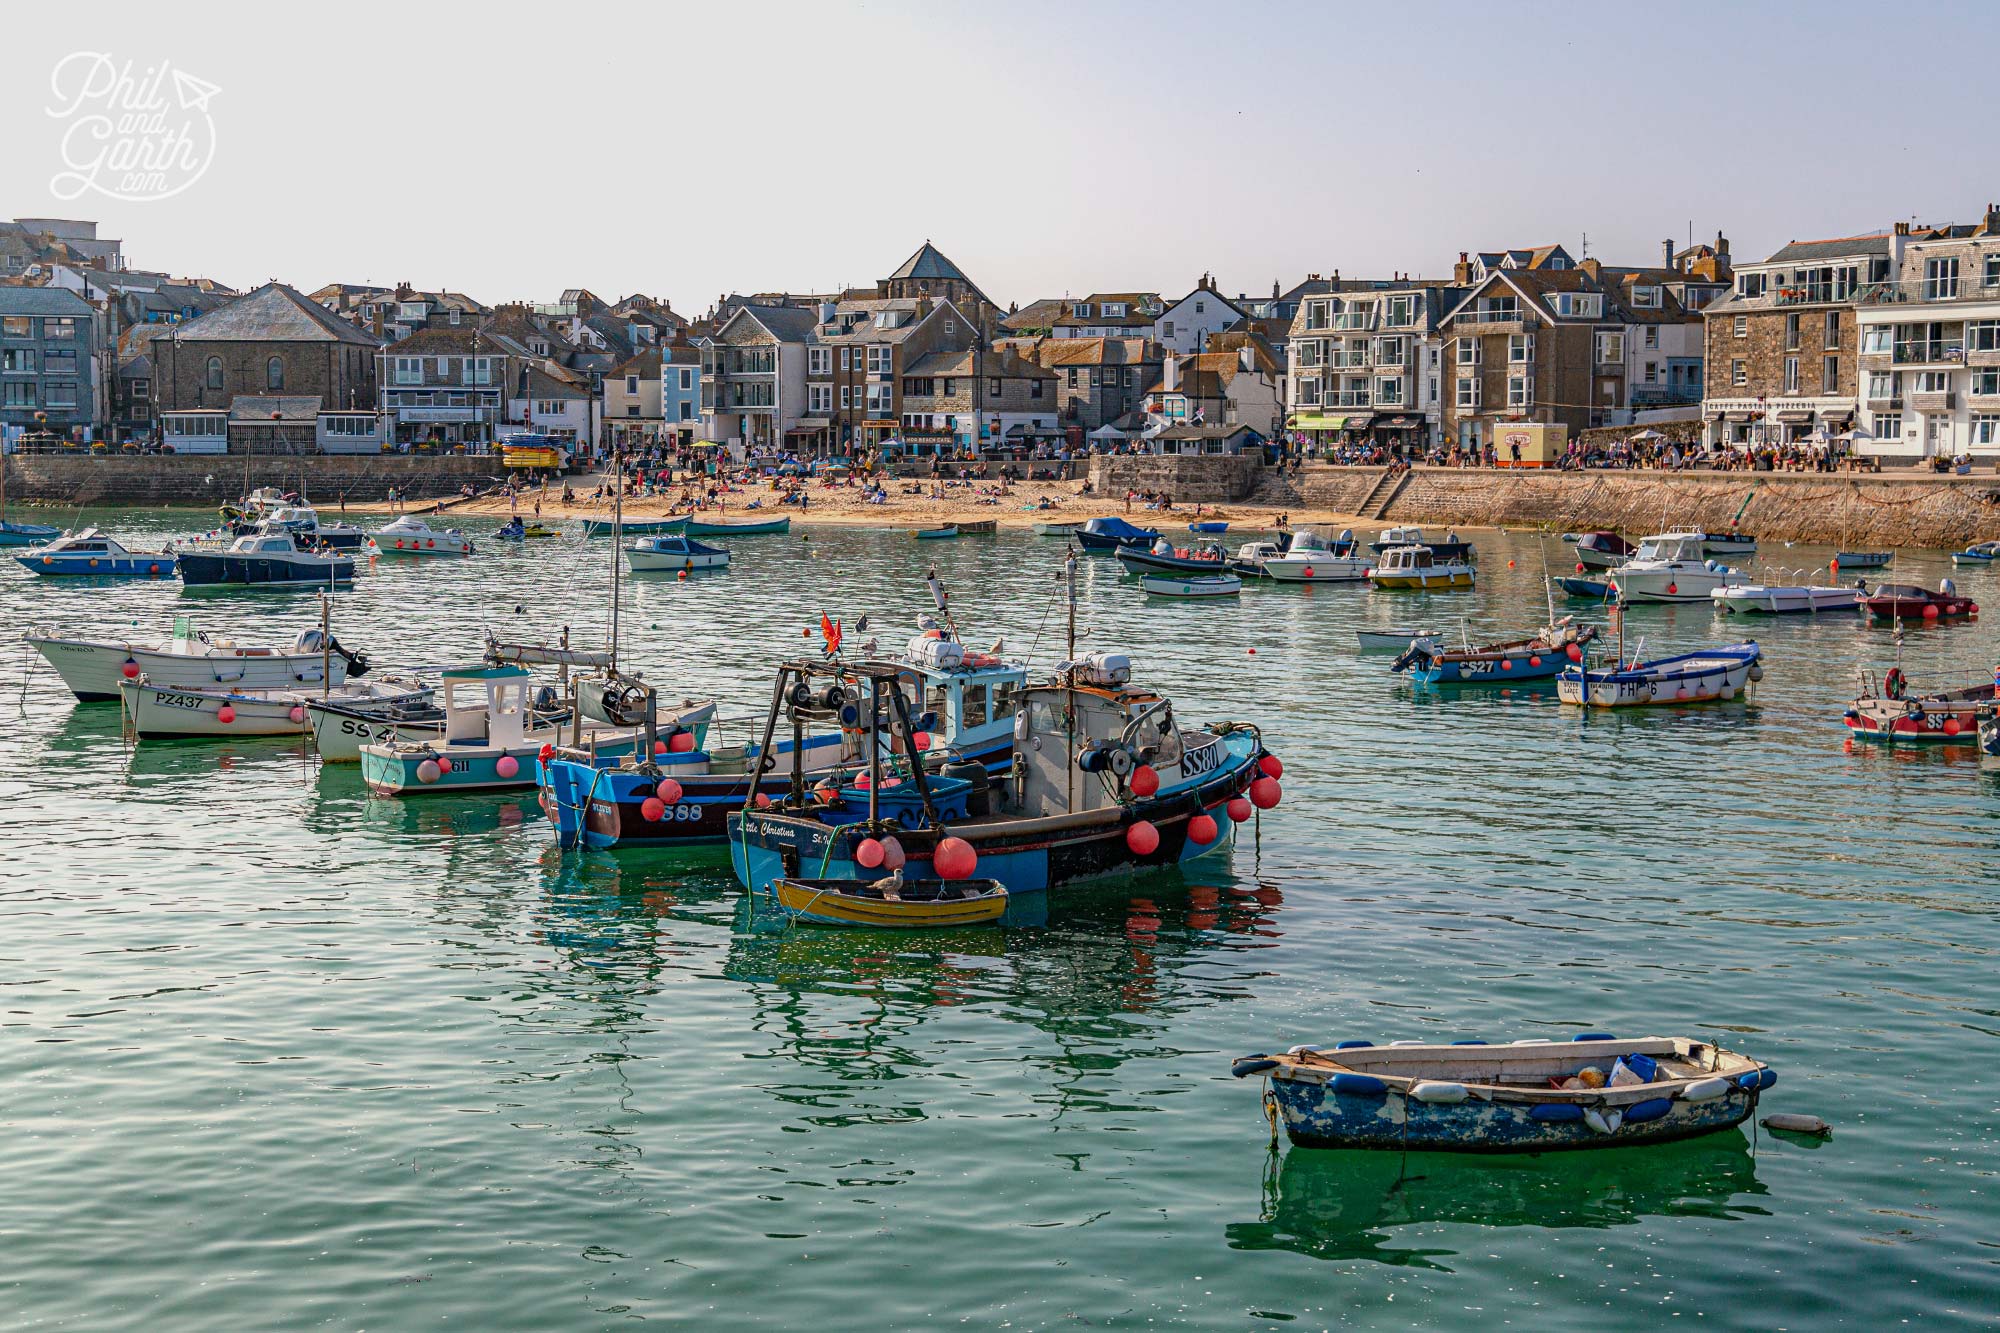 Picturesque St Ives has a delightful harbour featuring a small beach